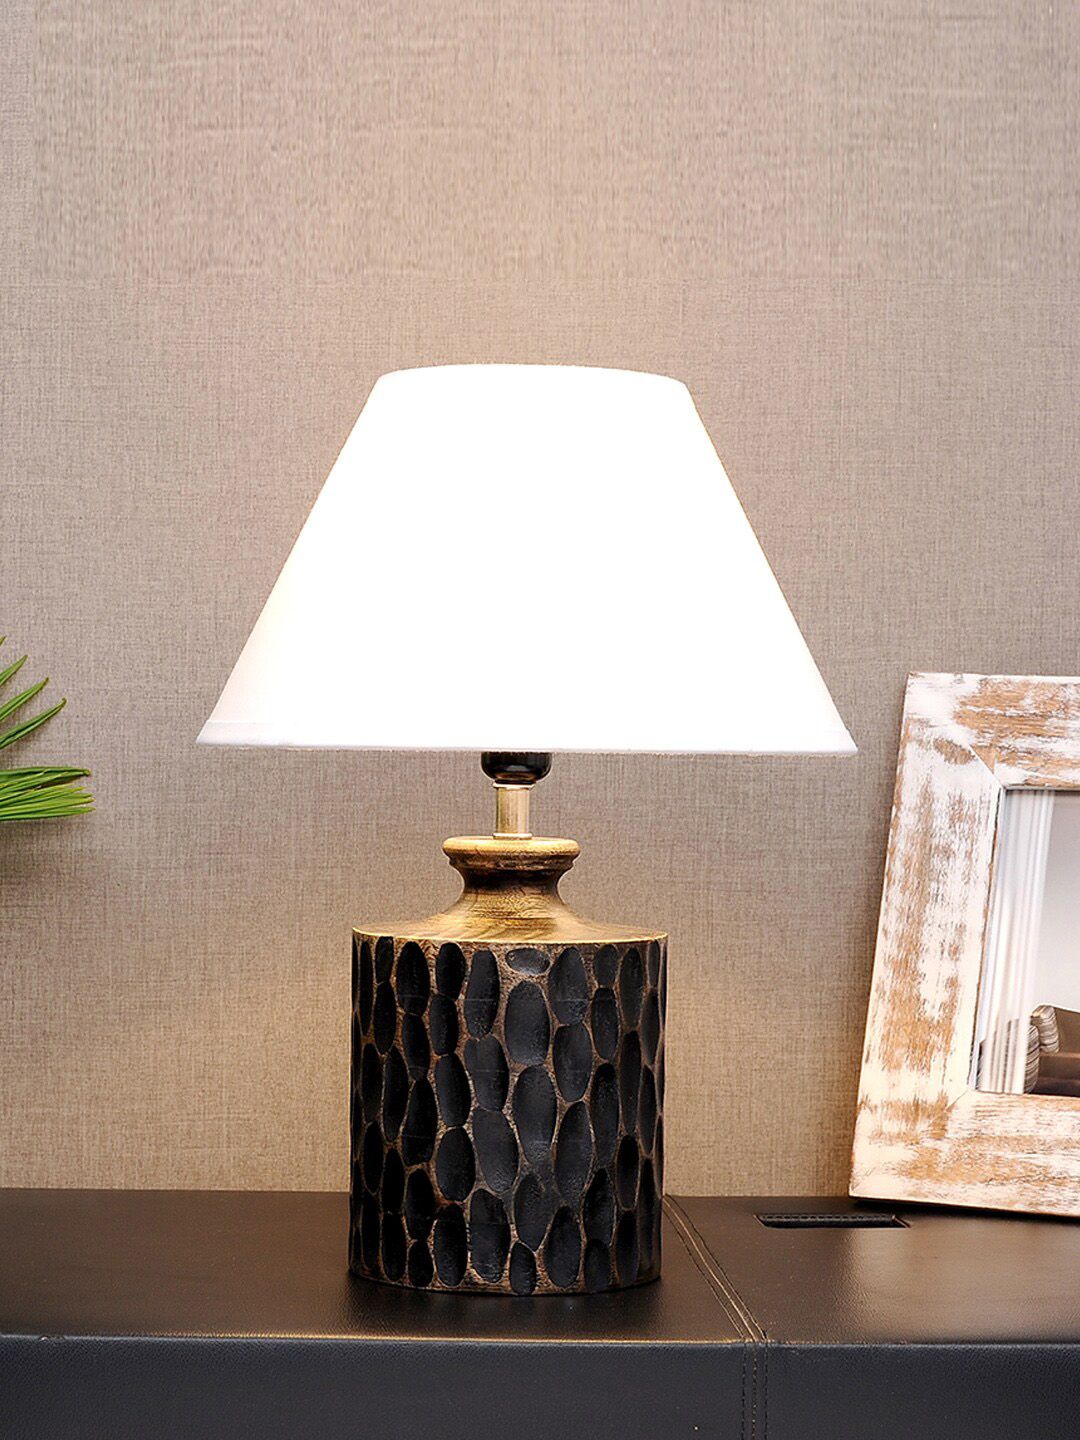 THE LIGHT STORE Black Self-Design Bedside Standard Table Lamp With White Shade Price in India